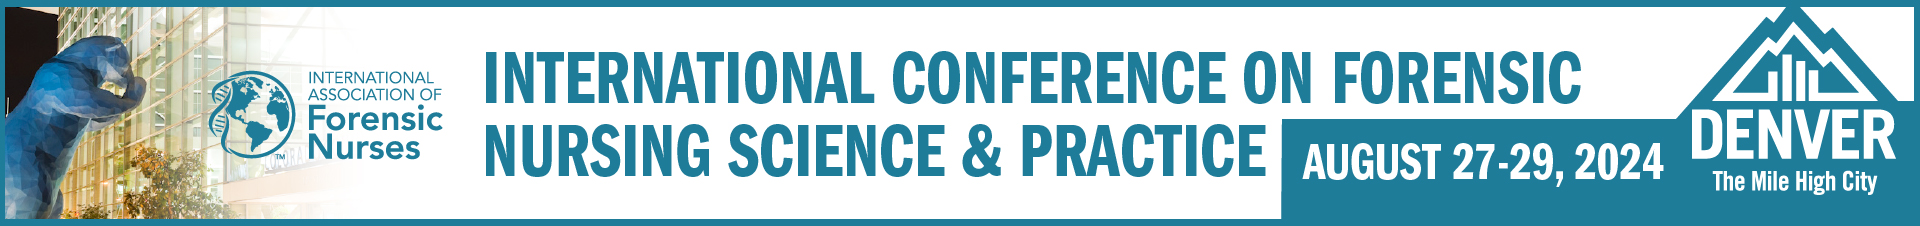 2024 International Conference on Forensic Nursing Science and Practice Event Banner